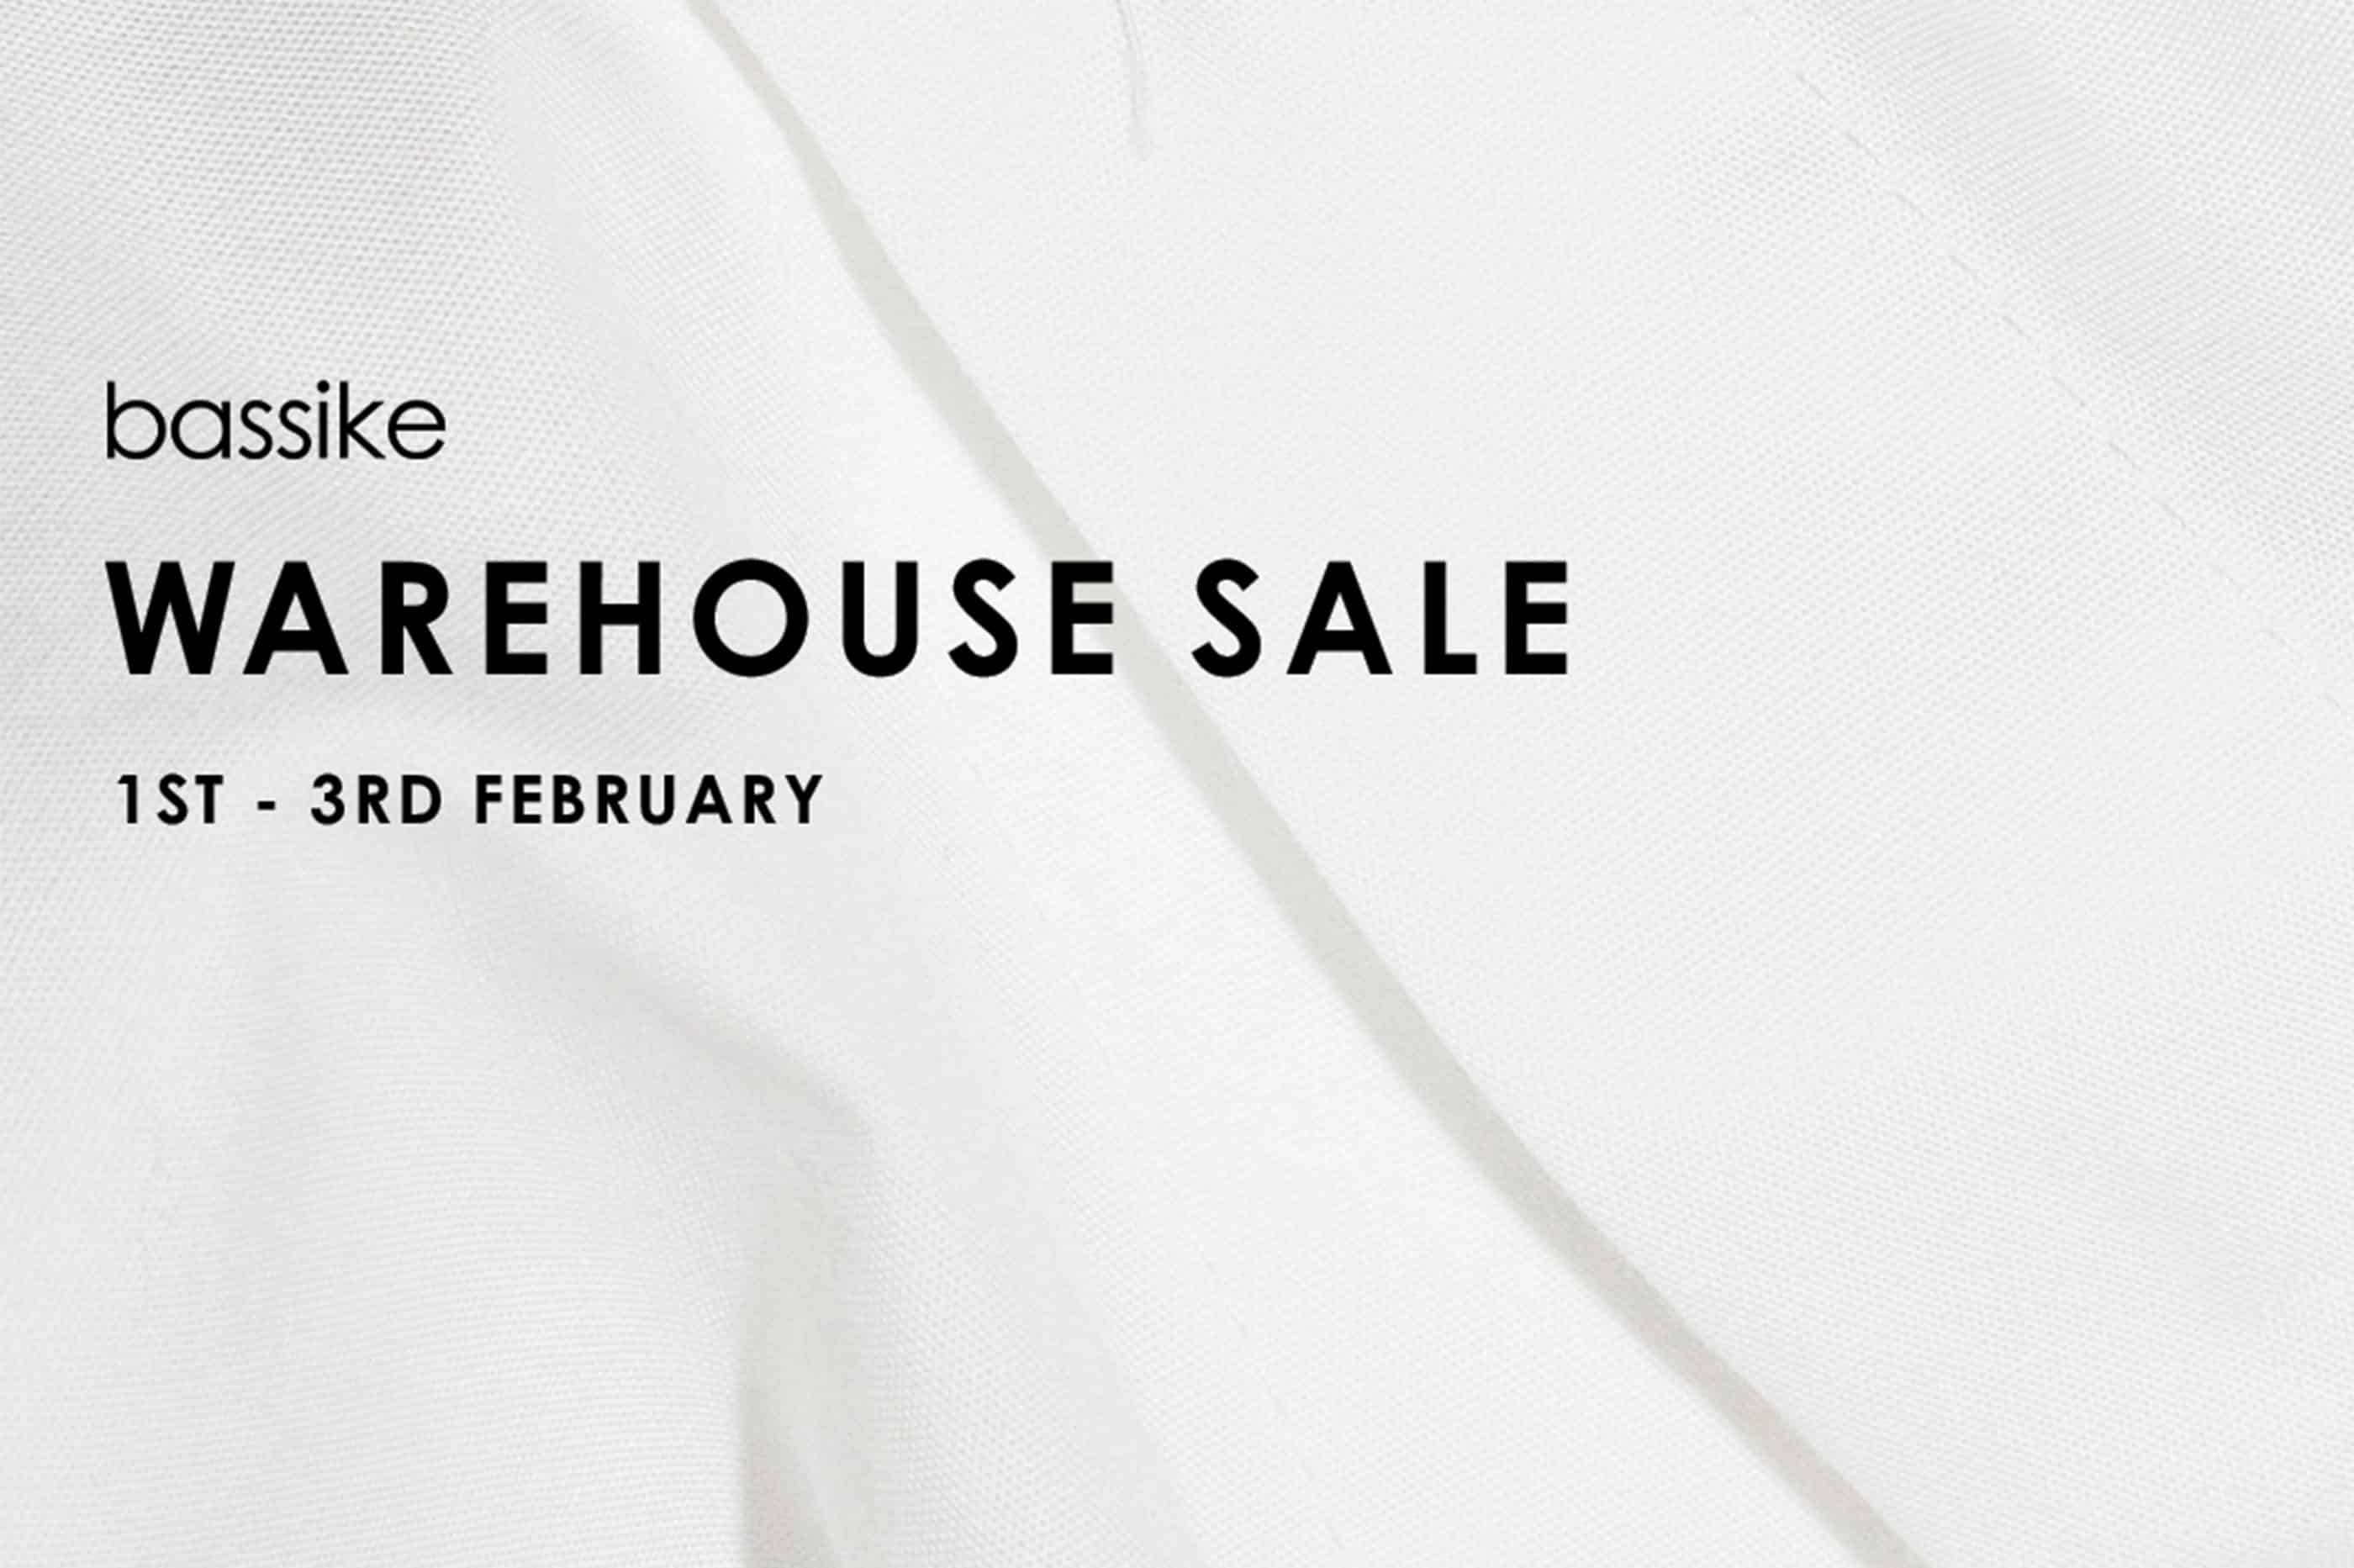 bassike is hosting a warehouse sale in Sydney